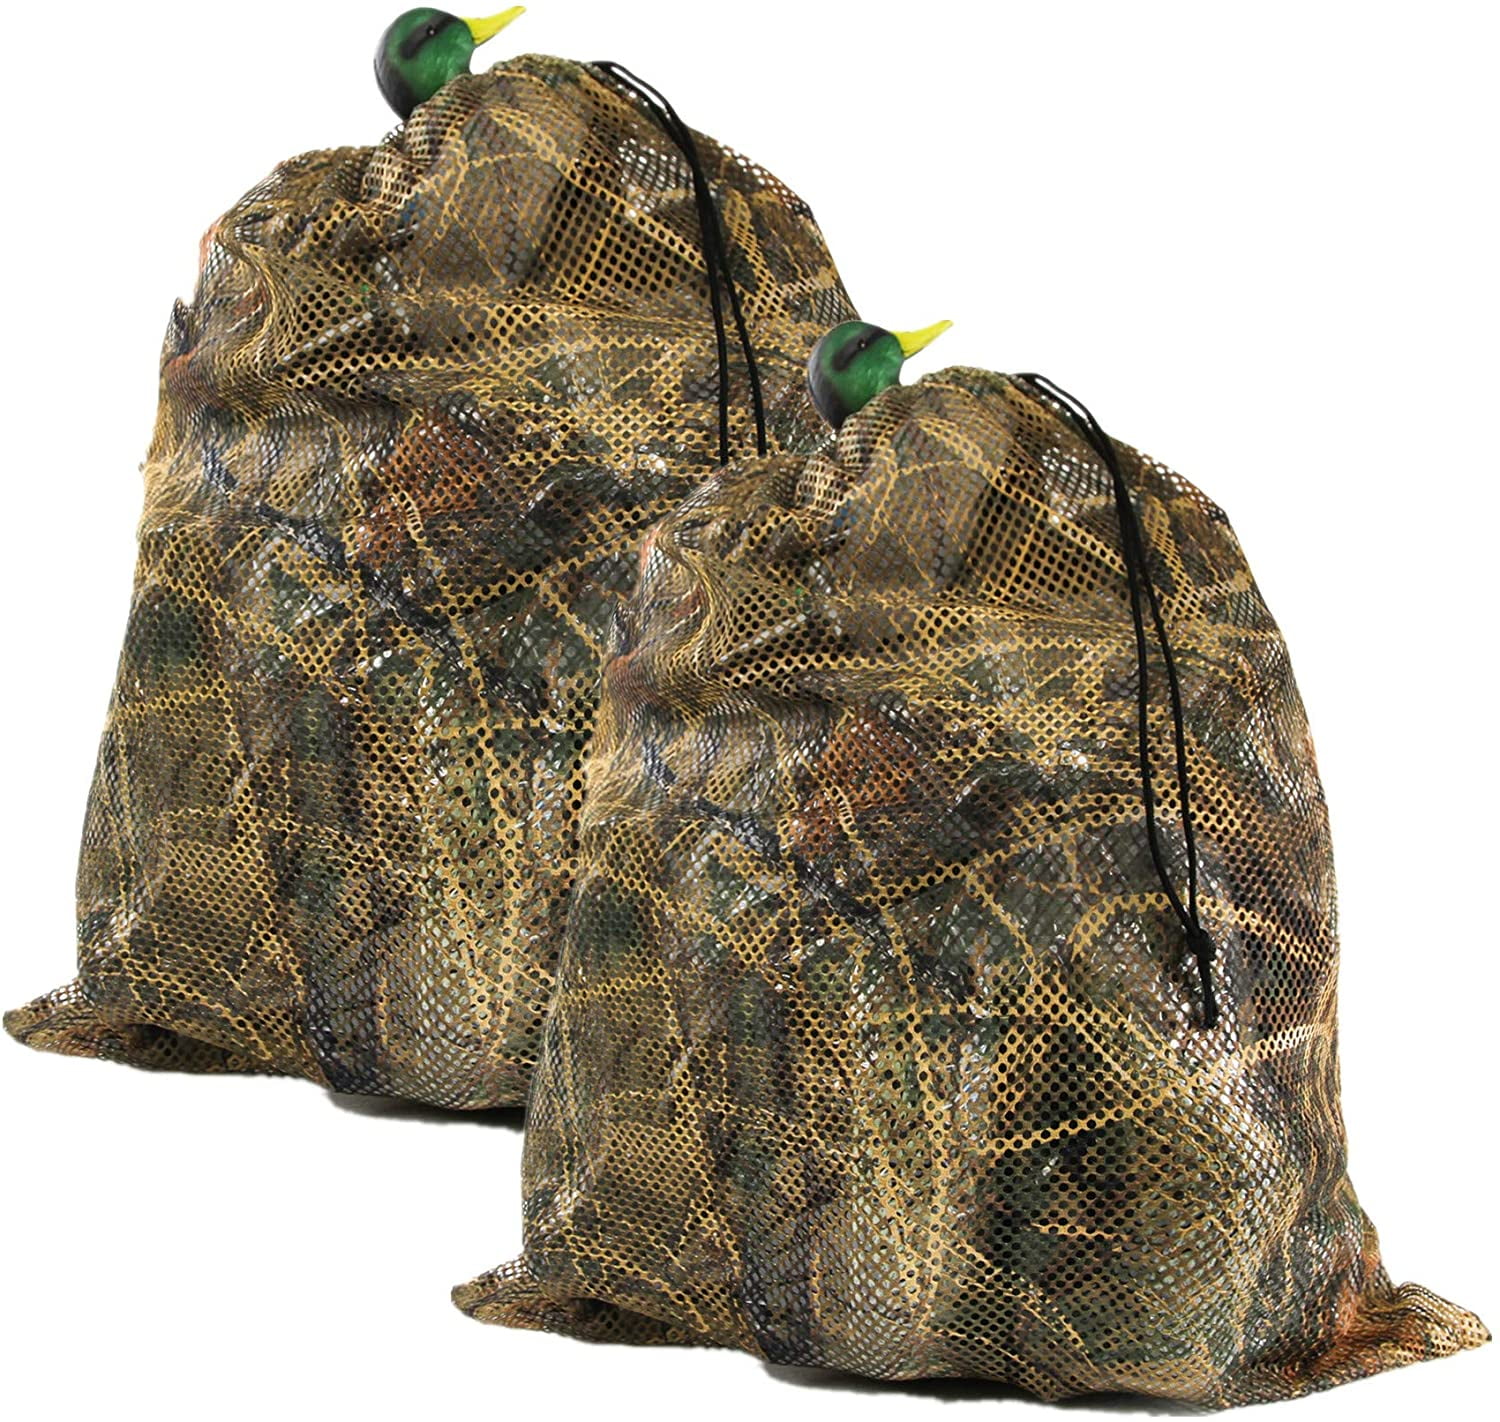 BACK PACK STYLE REALTREE MAX-5 CAMO NEW AVERY OUTDOORS FLOATING DECOY BAG 